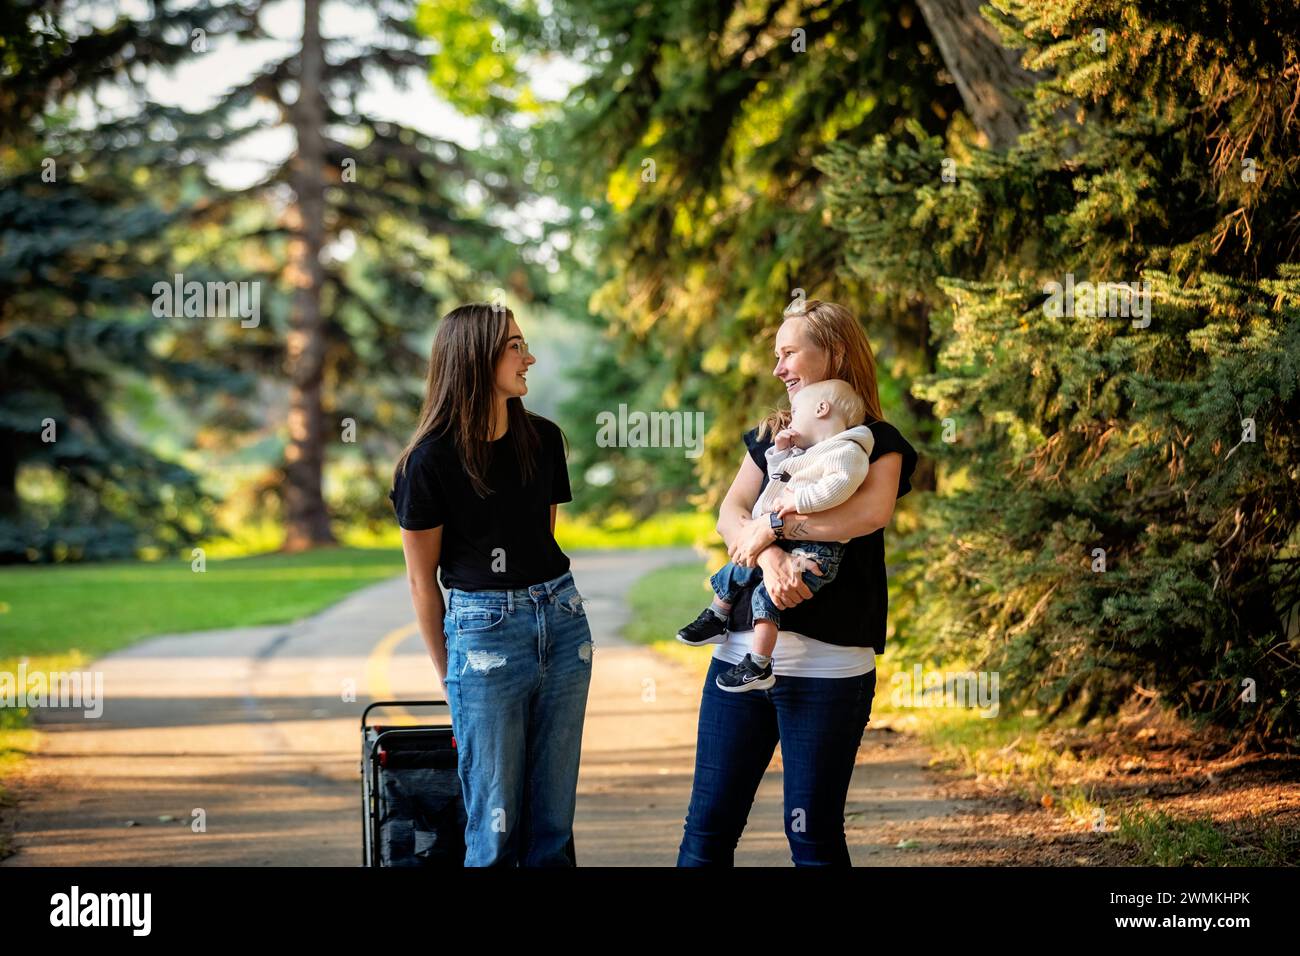 Mother spending quality time with her teenage daughter and young son who has Down Syndrome in a city park during an autumn day; Leduc, Alberta, Canada Stock Photo